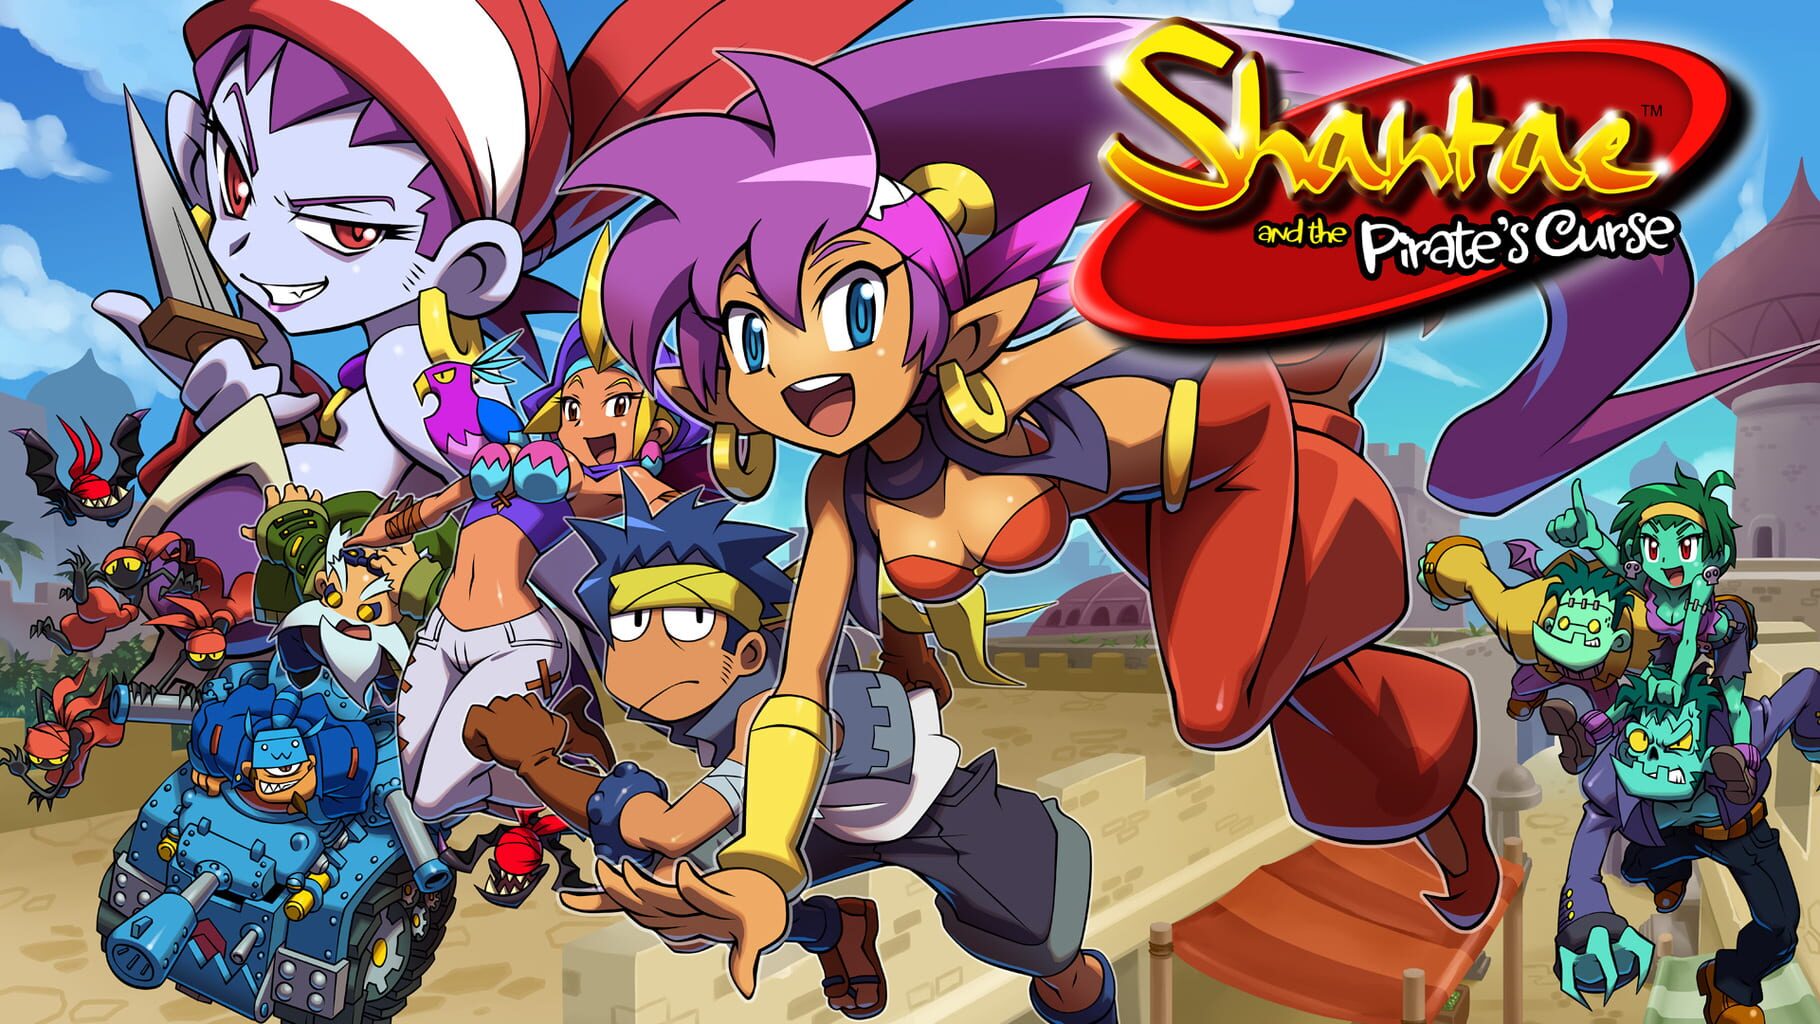 Artwork for Shantae and the Pirate's Curse